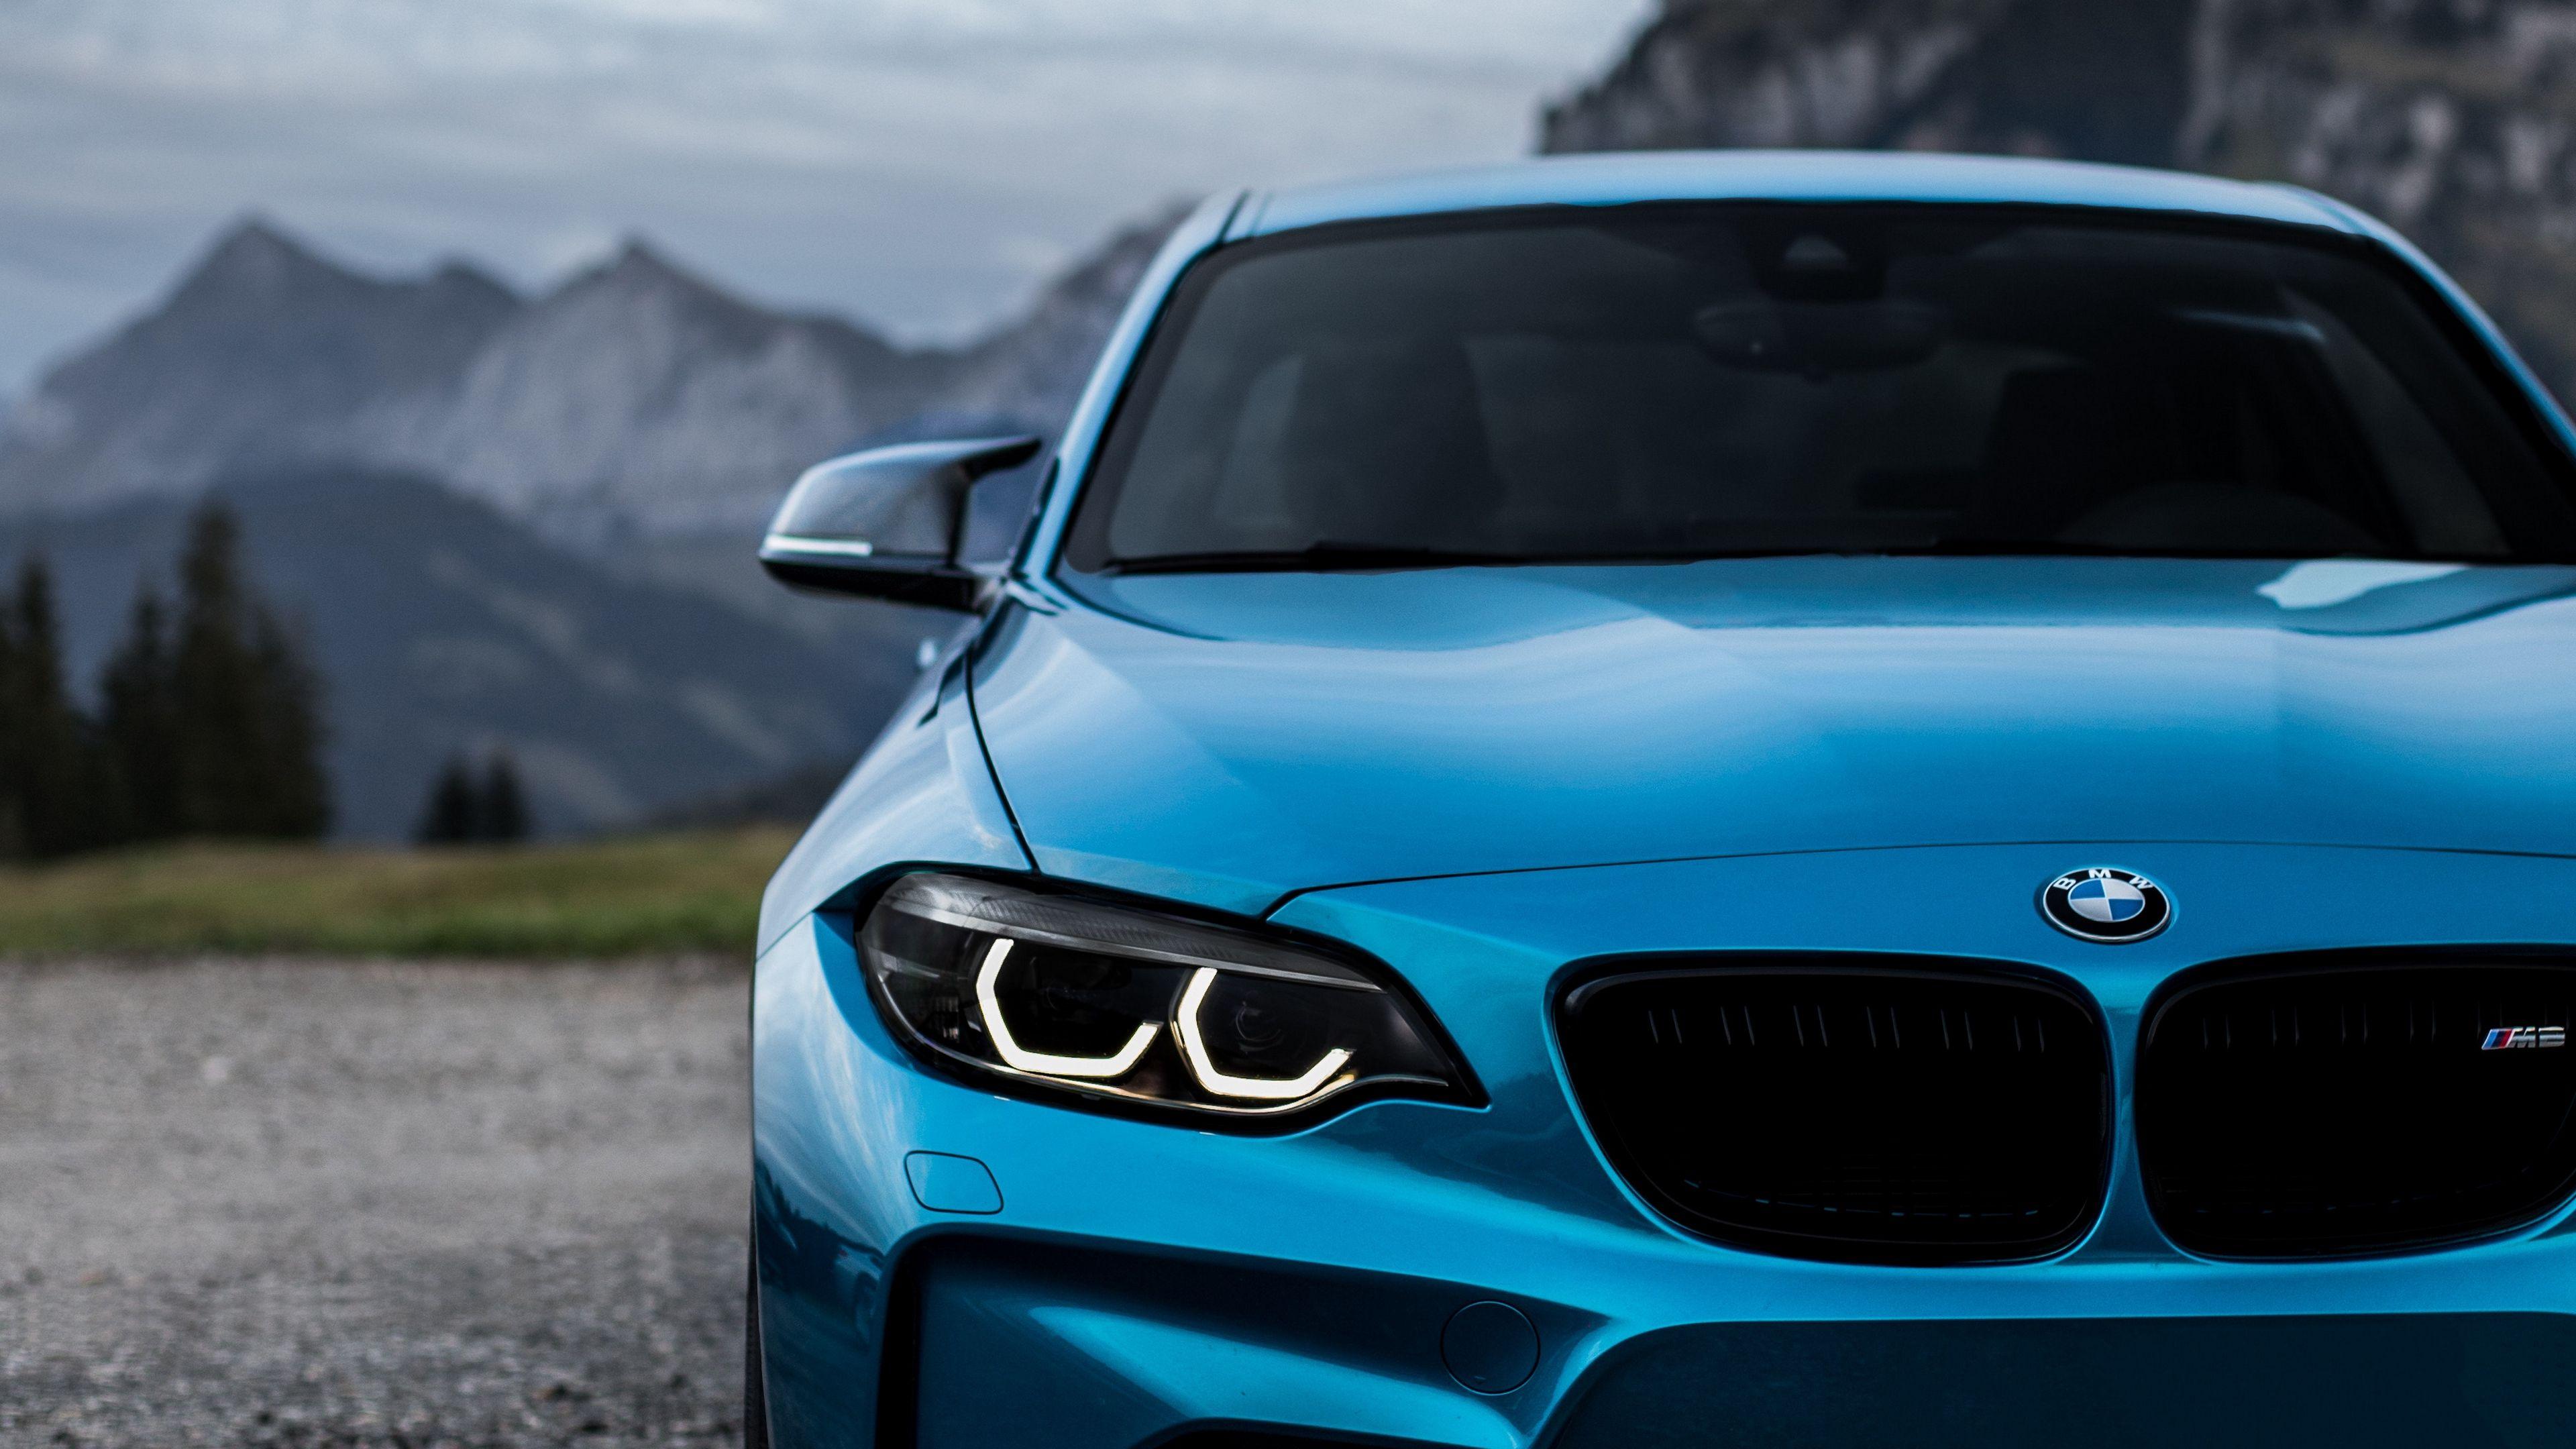 10 Perfect 4k wallpaper pc bmw You Can Use It Without A Penny